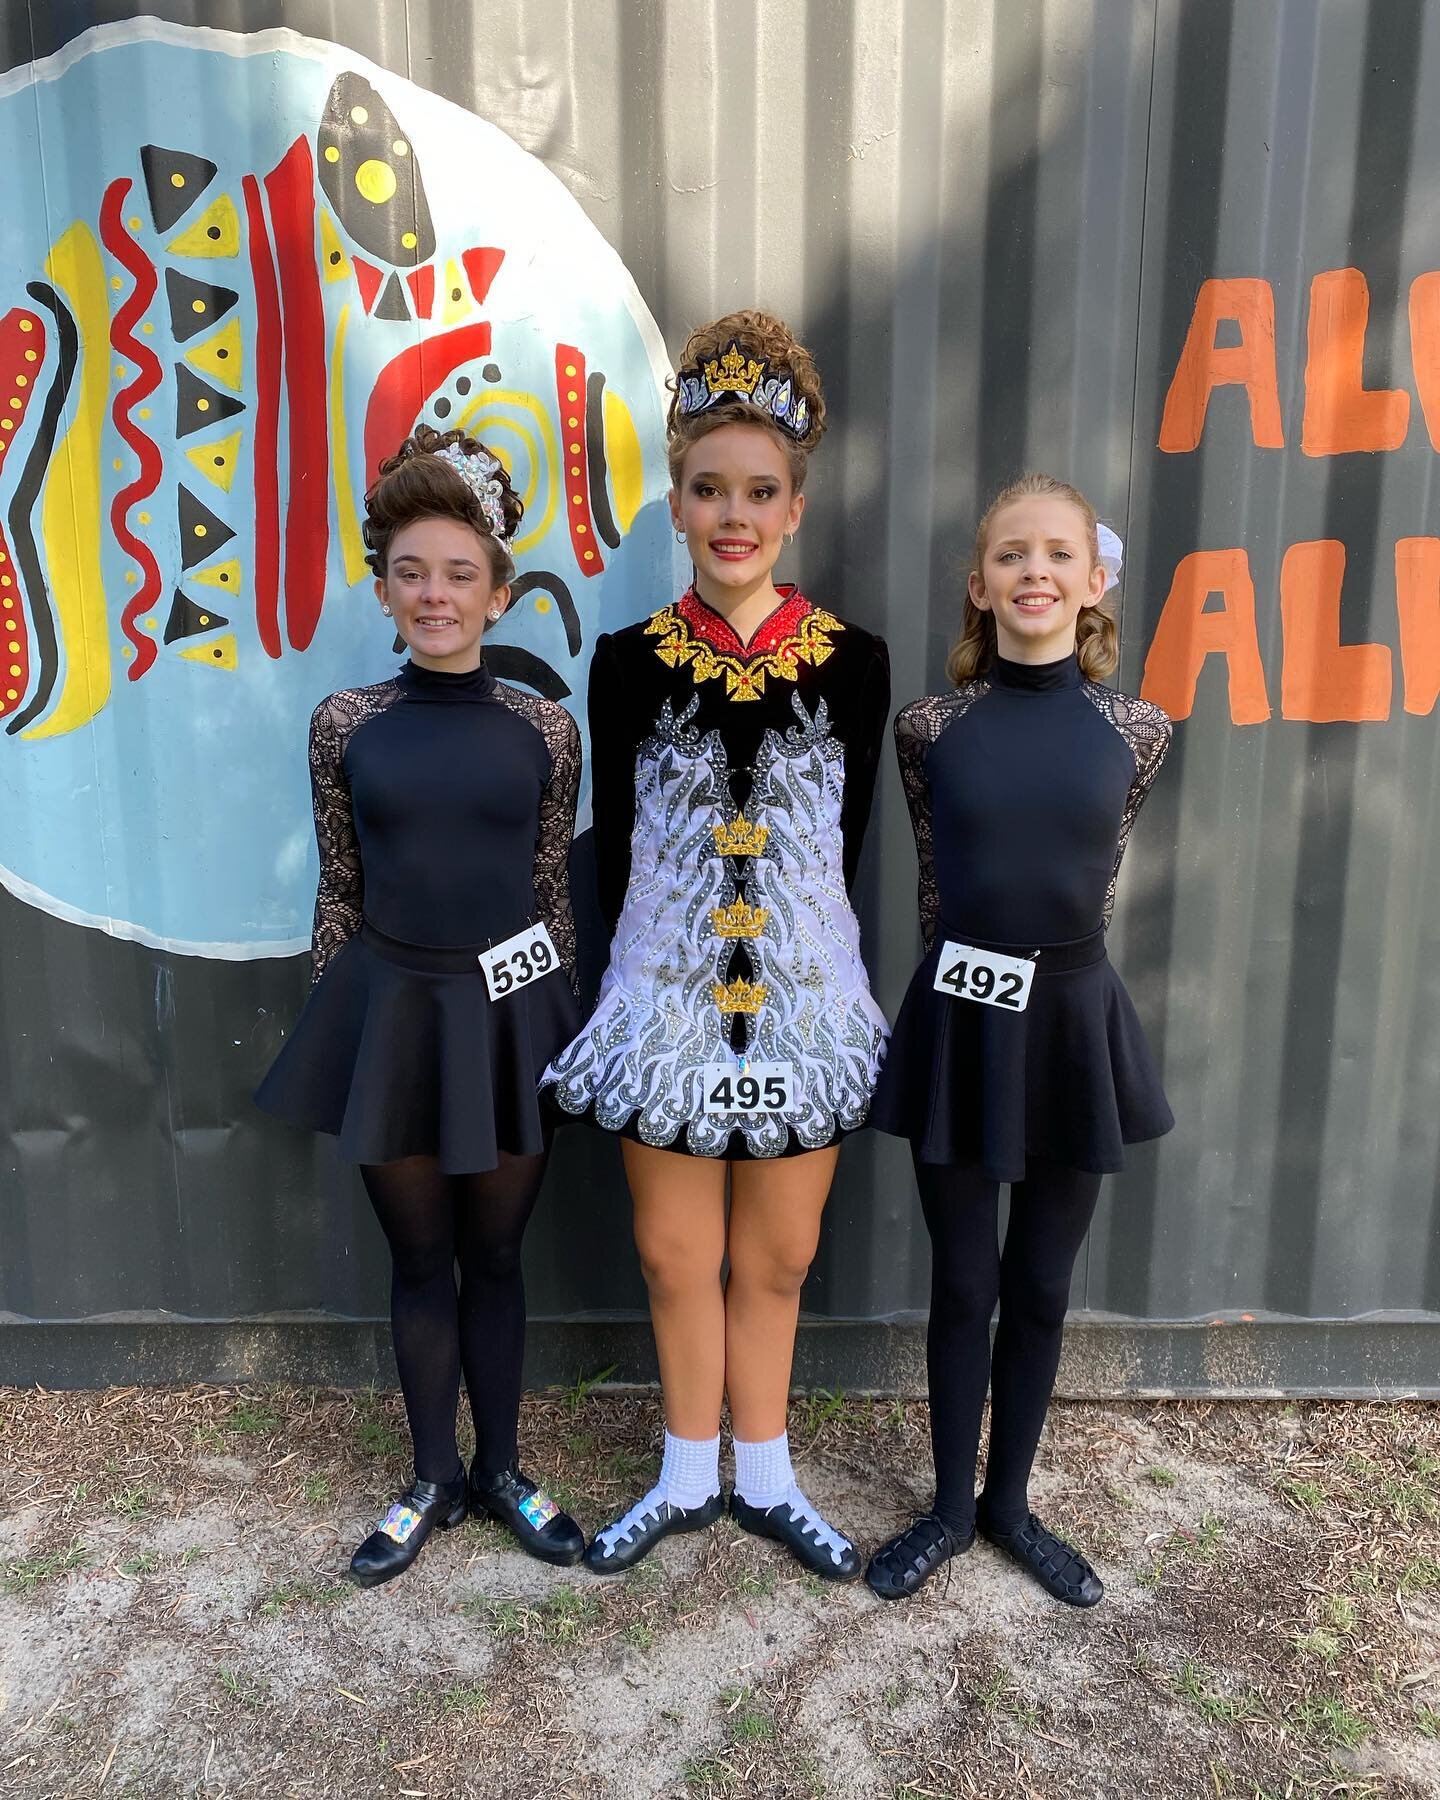 🍭 SWEETS OF MAY FEIS 🍭

Lovely dancing by our seniors on day 2 of the Sweets of May Feis 🏆
Congrats to all of #teamCA for a fab weekend of dancing!

#AIDAWA #sweetsofmayfeis